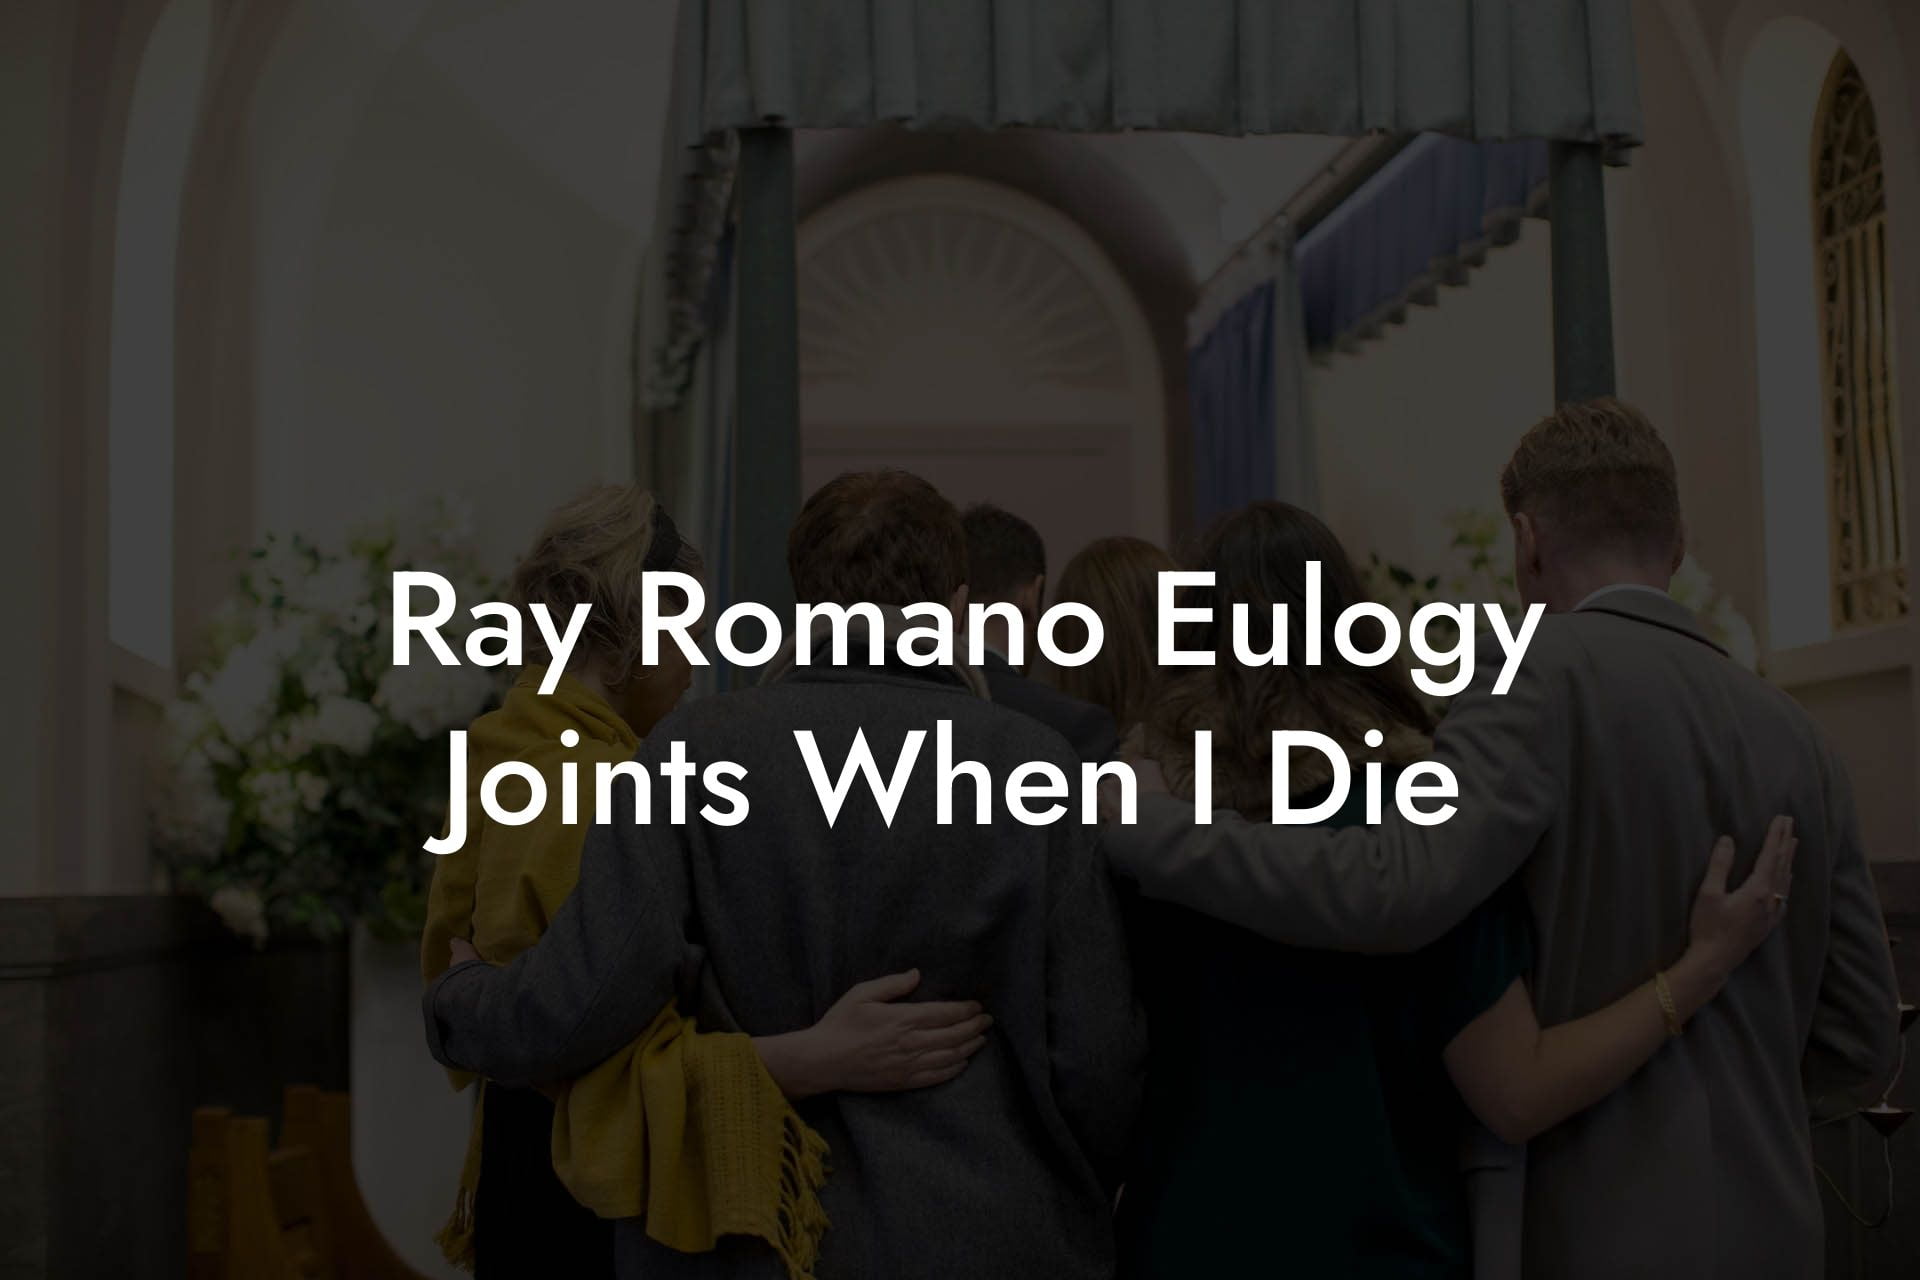 Ray Romano Eulogy Joints When I Die